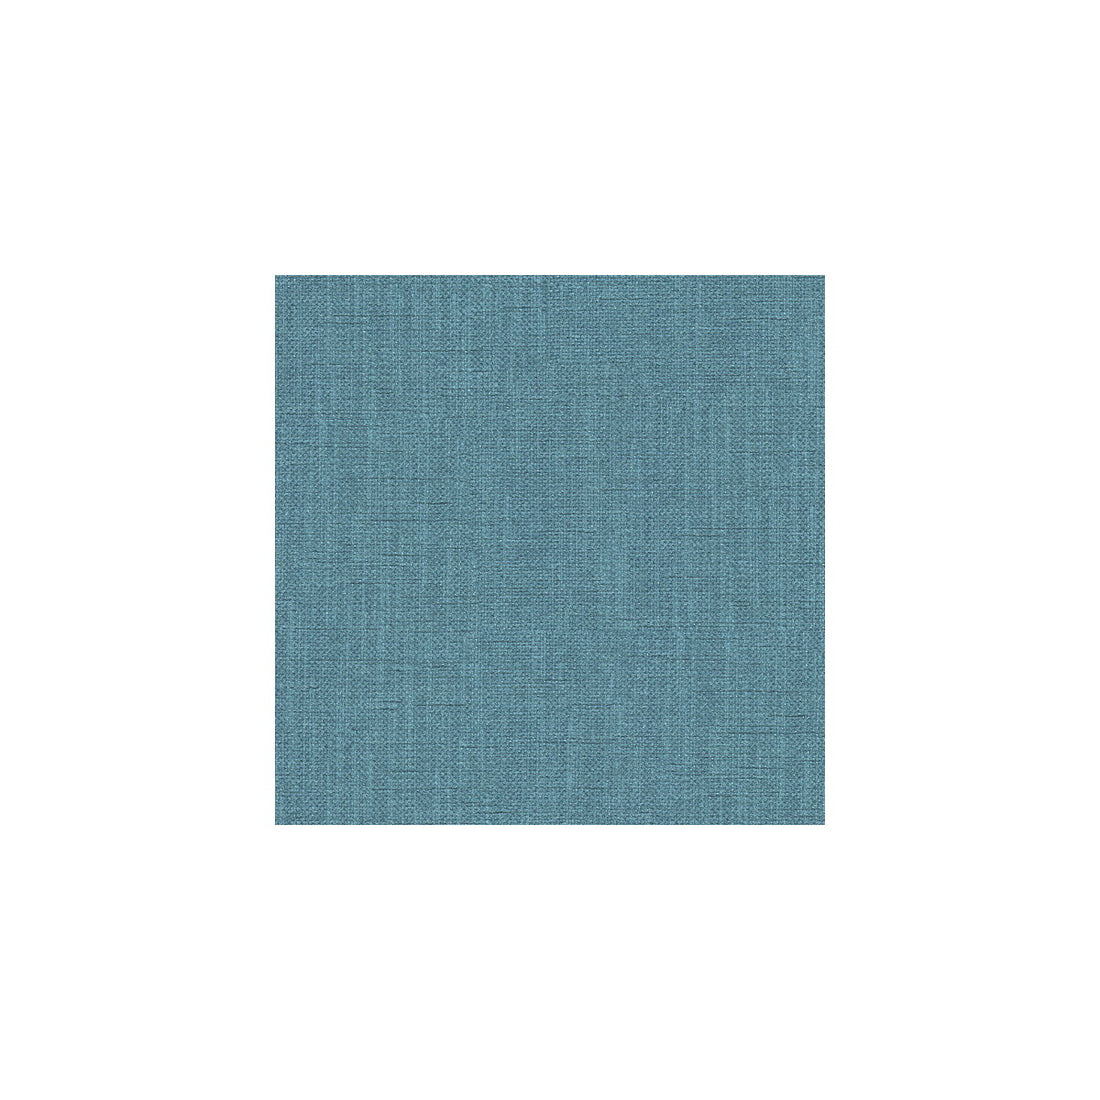 Kravet Basics fabric in 33120-505 color - pattern 33120.505.0 - by Kravet Basics in the Perfect Plains collection